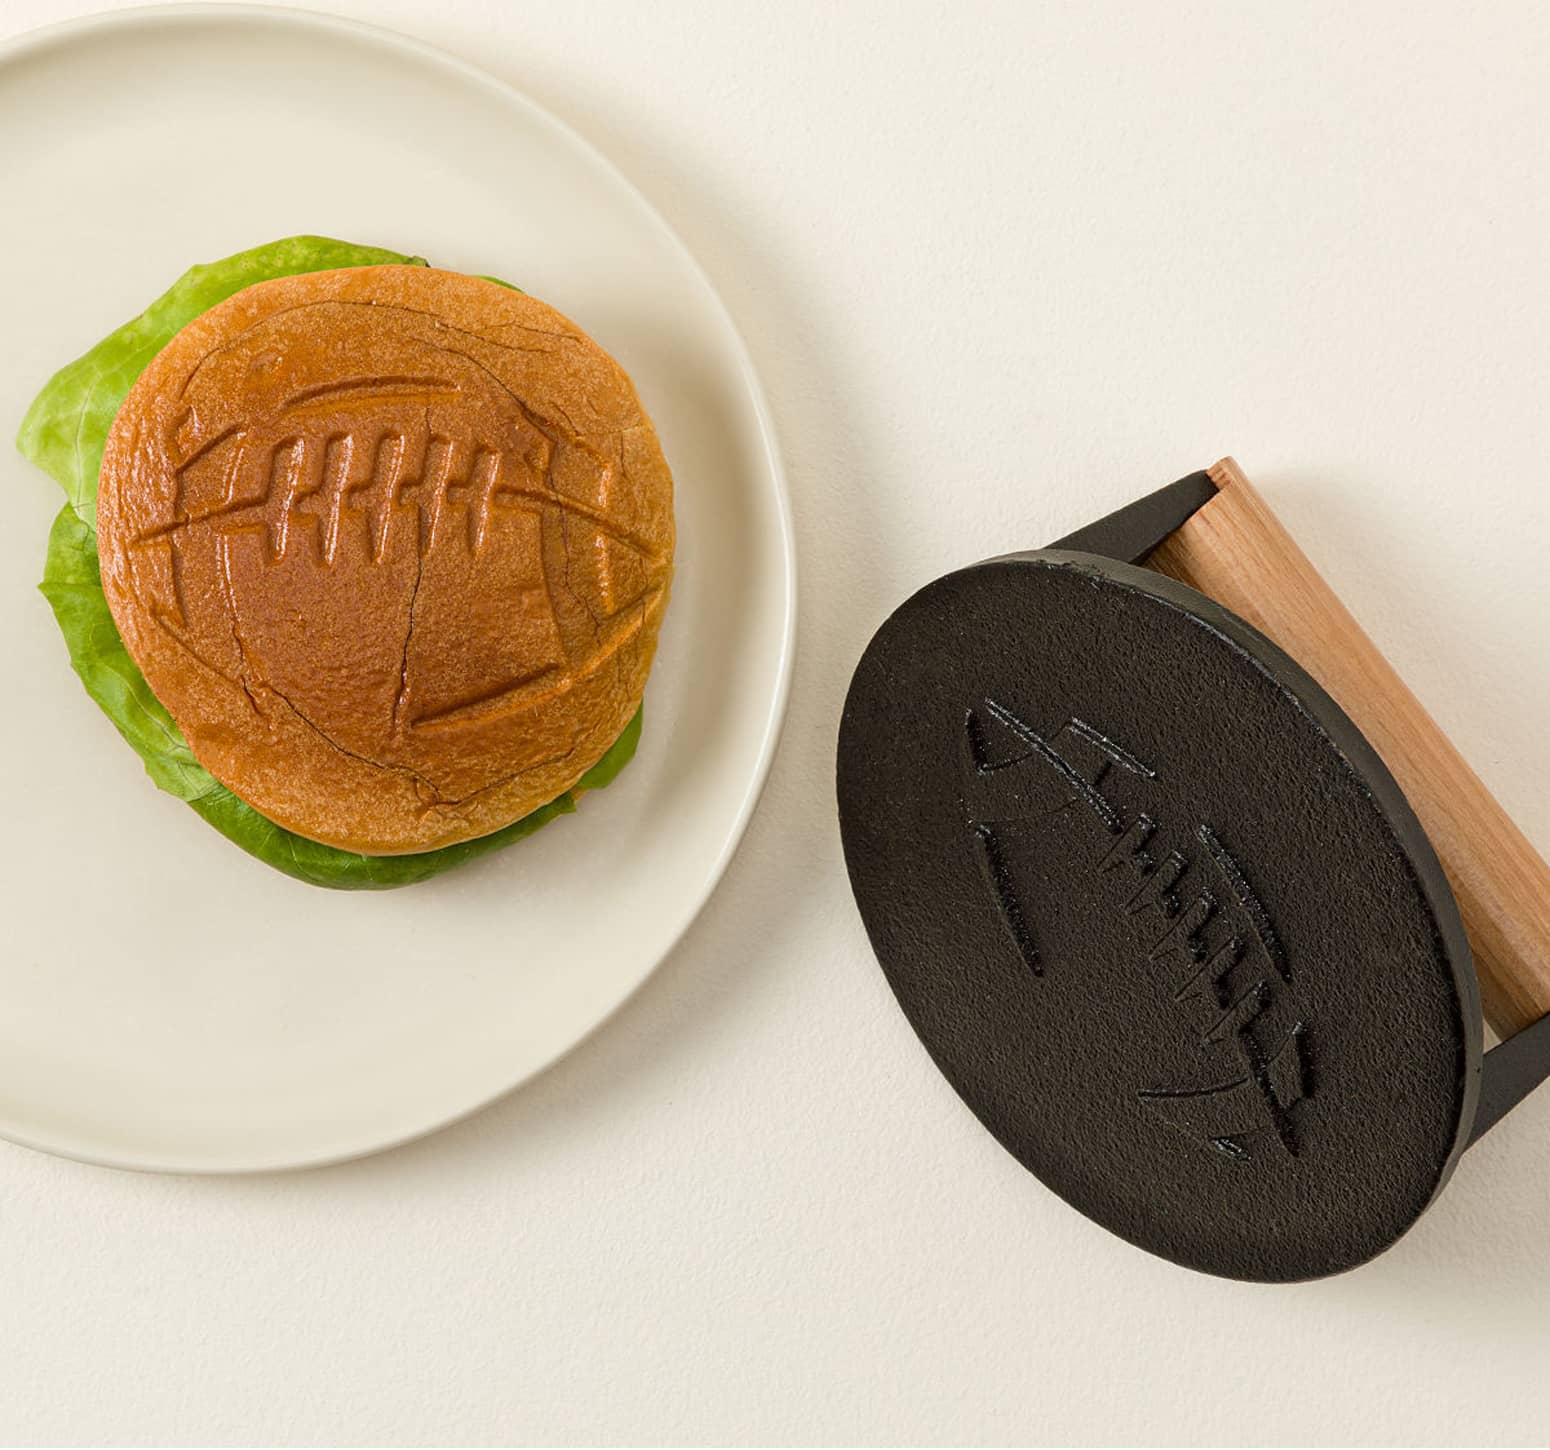 Football Grill Press -  Sear a Football onto Buns, Steaks, Chicken, and More